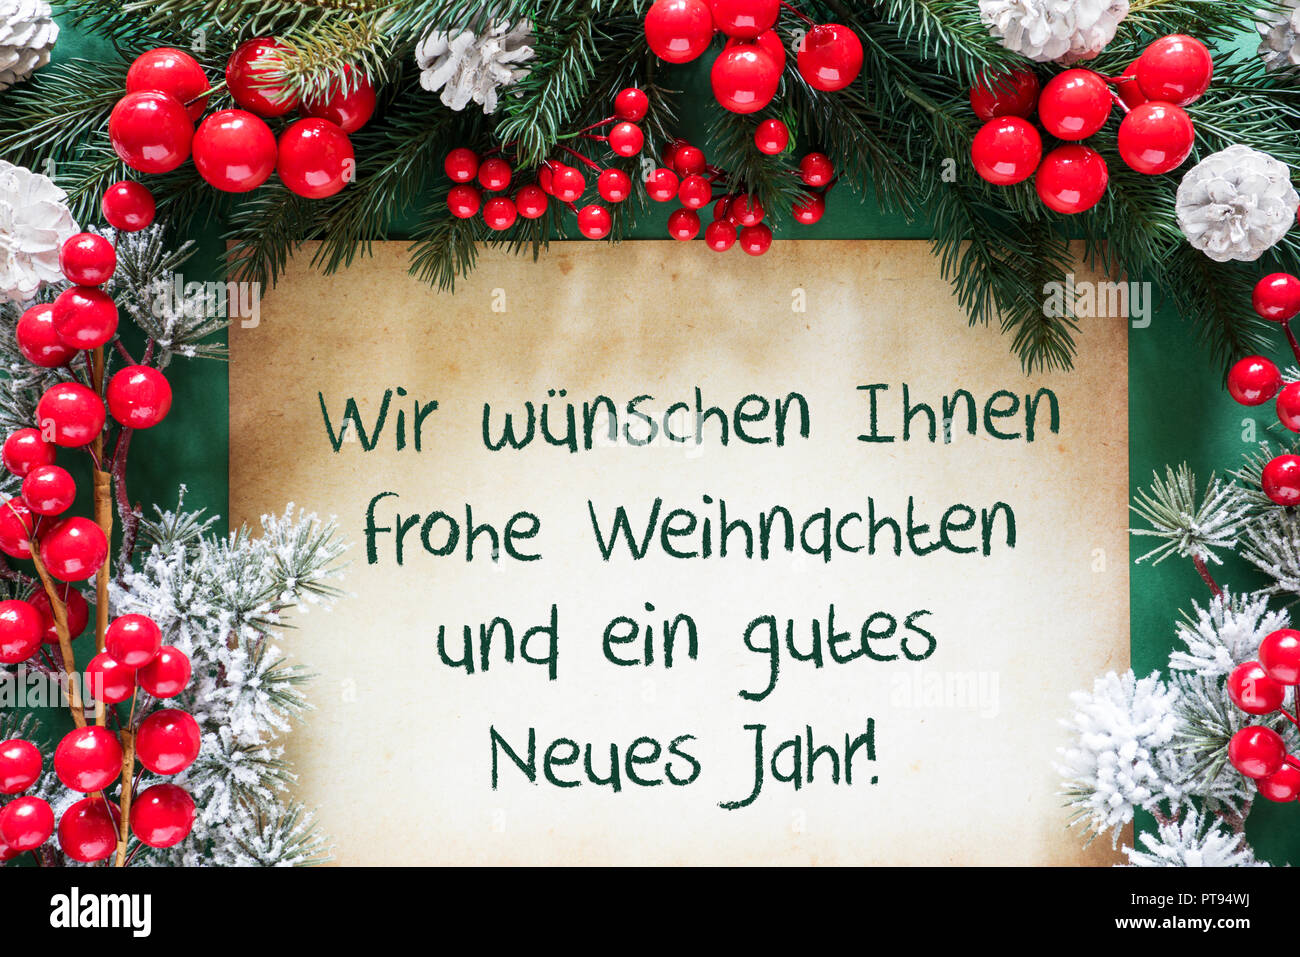 Christmas Decoration, Gutes Neues Jahr Means Happy New Year Stock Photo